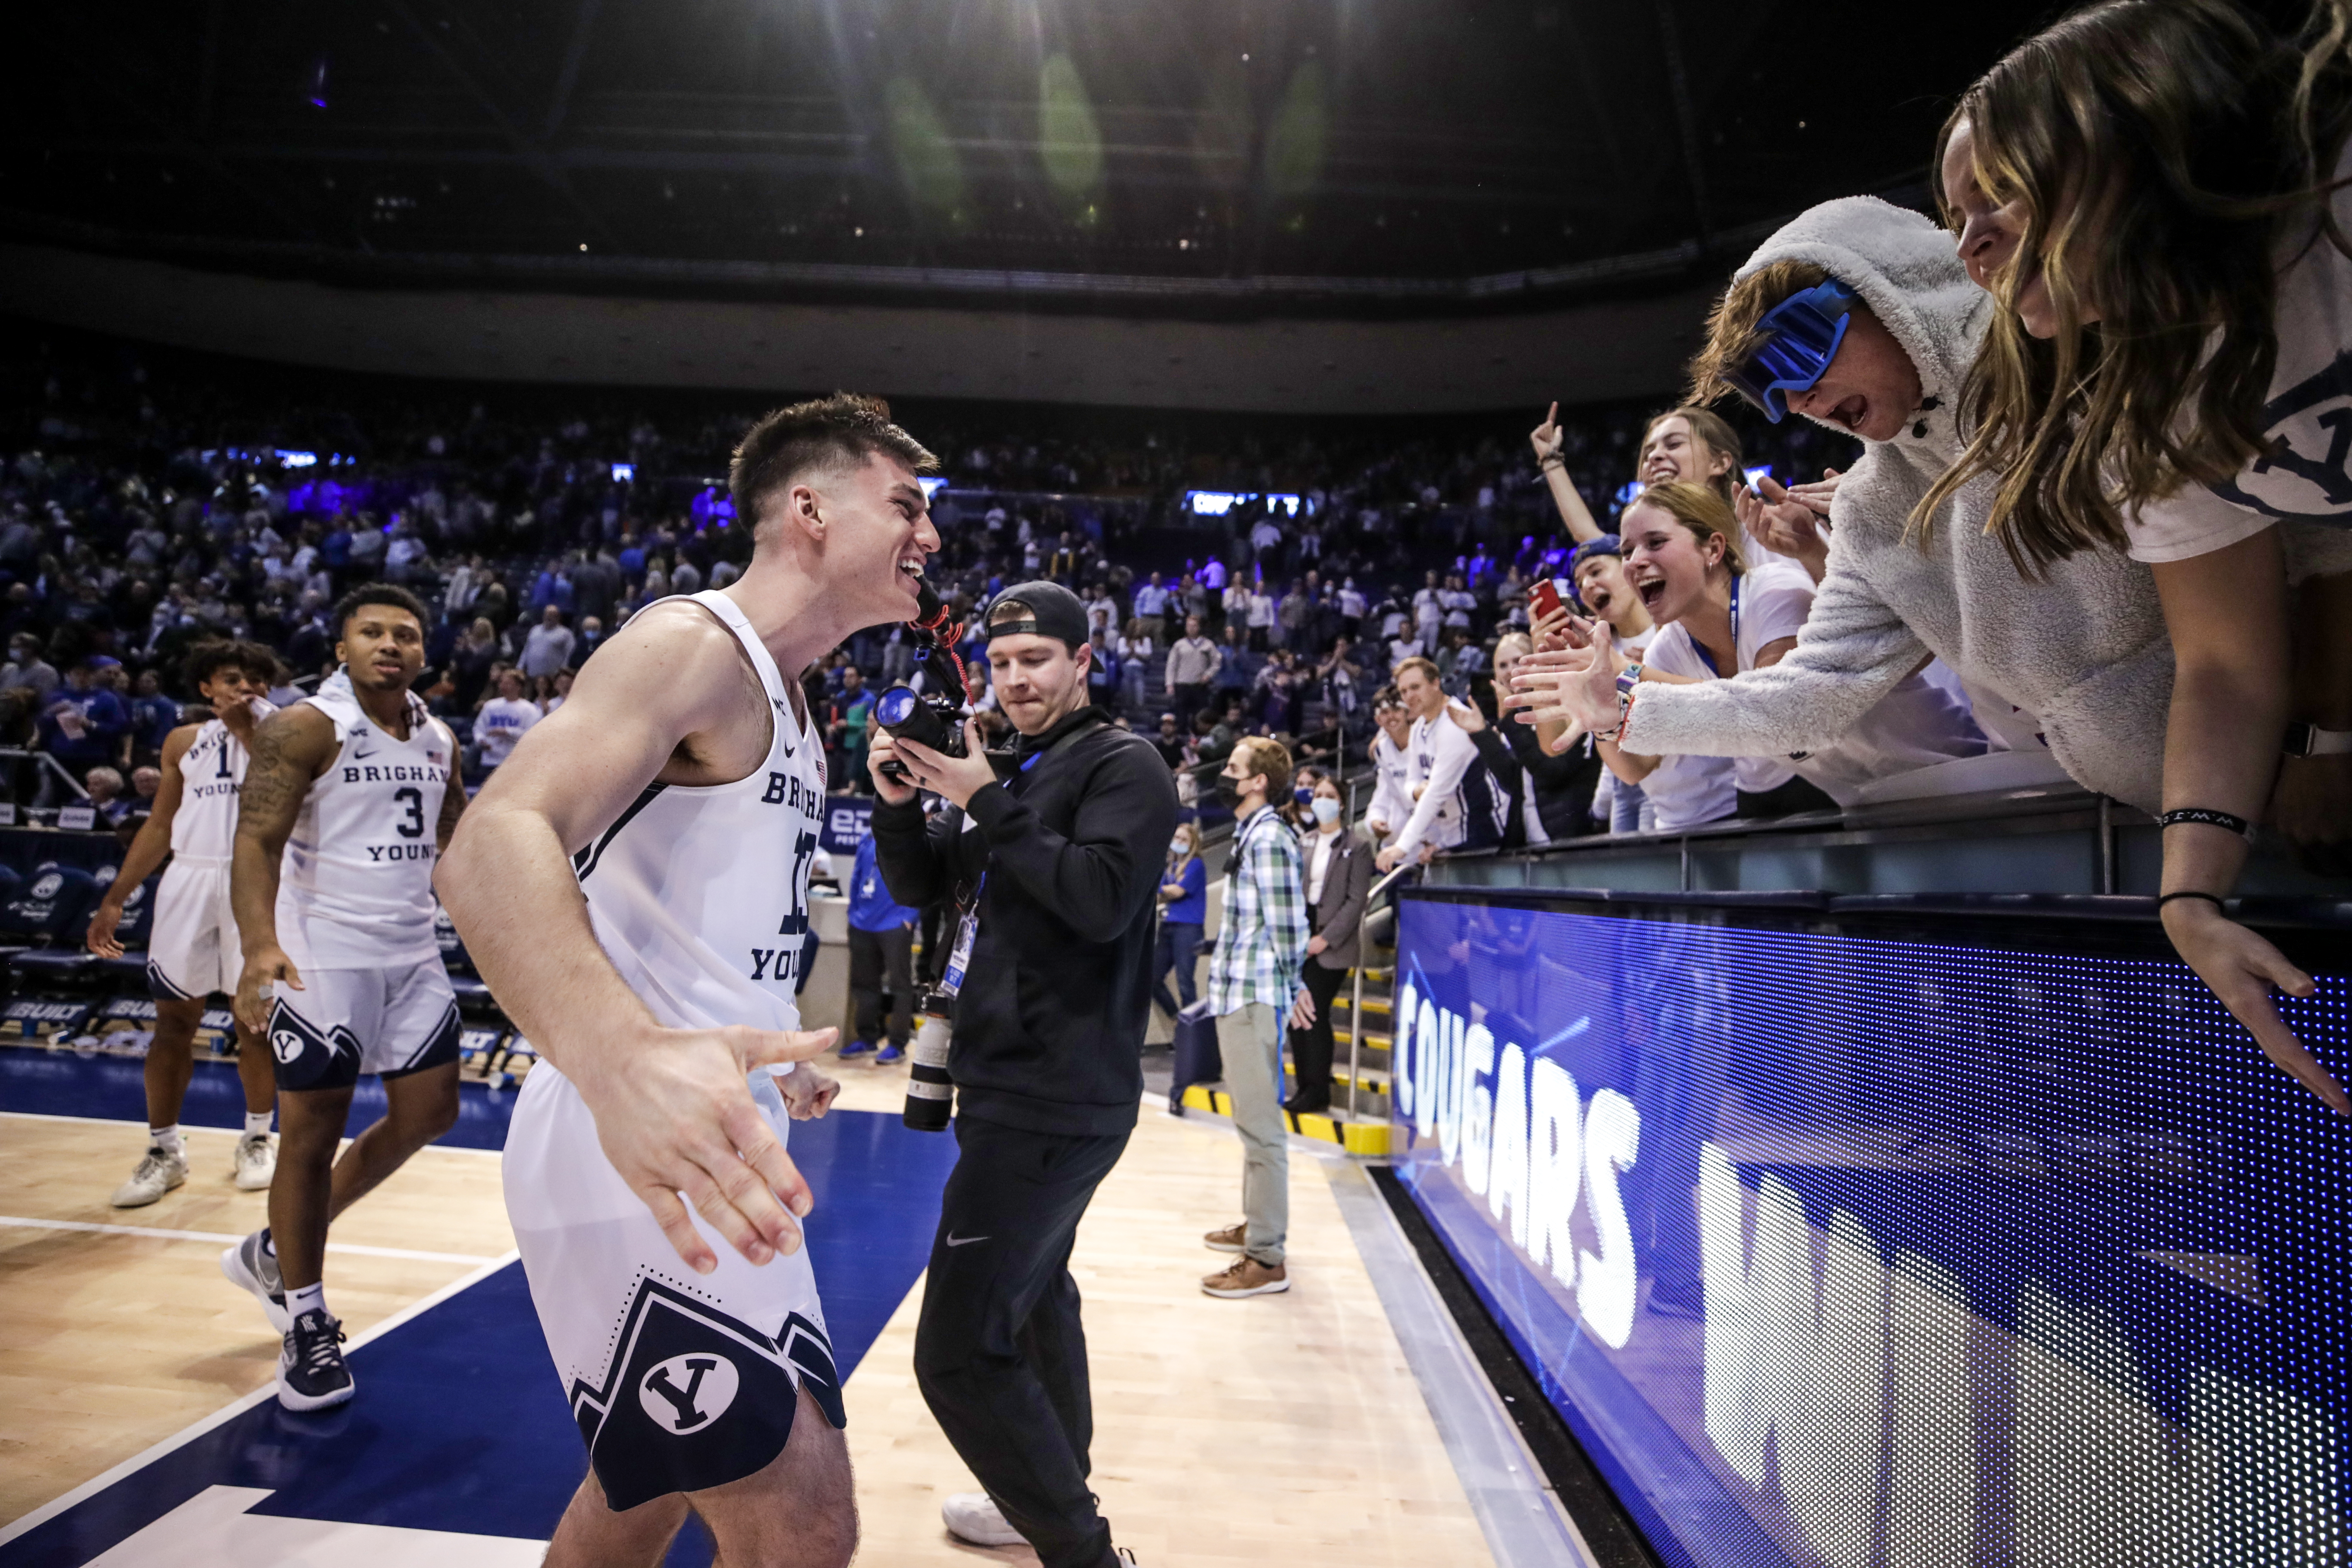 BYU basketball player Alex Barcello celebrates with the crowd after the Cougars 97-61 victory over Central Methodist University.